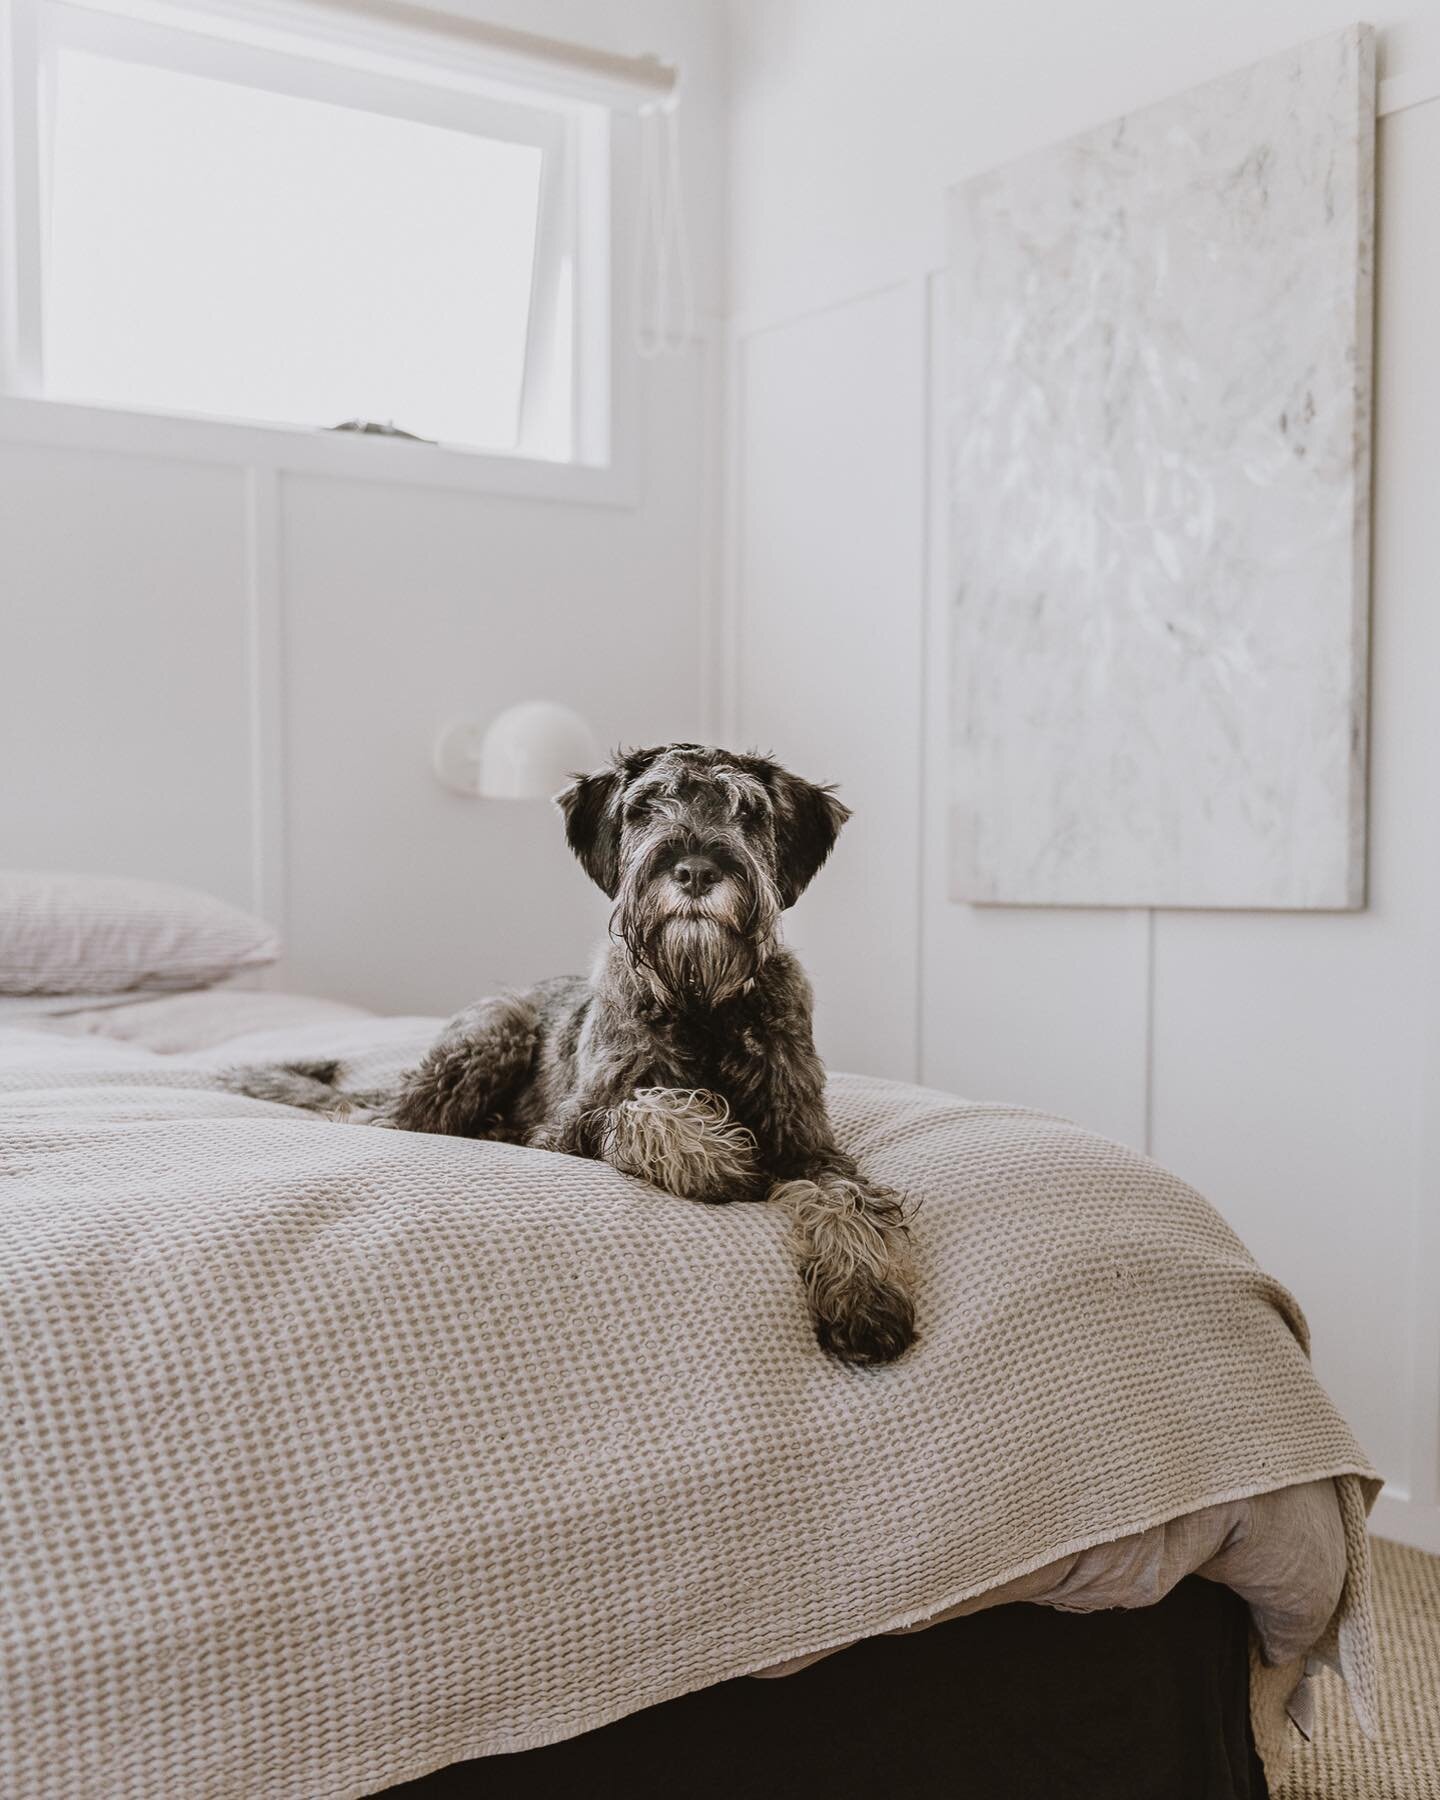 Just popping the gorgeous Teddy in your feed for dog day. 🥰

Pic from my time at the Golf St Project by @hatch_designstudio